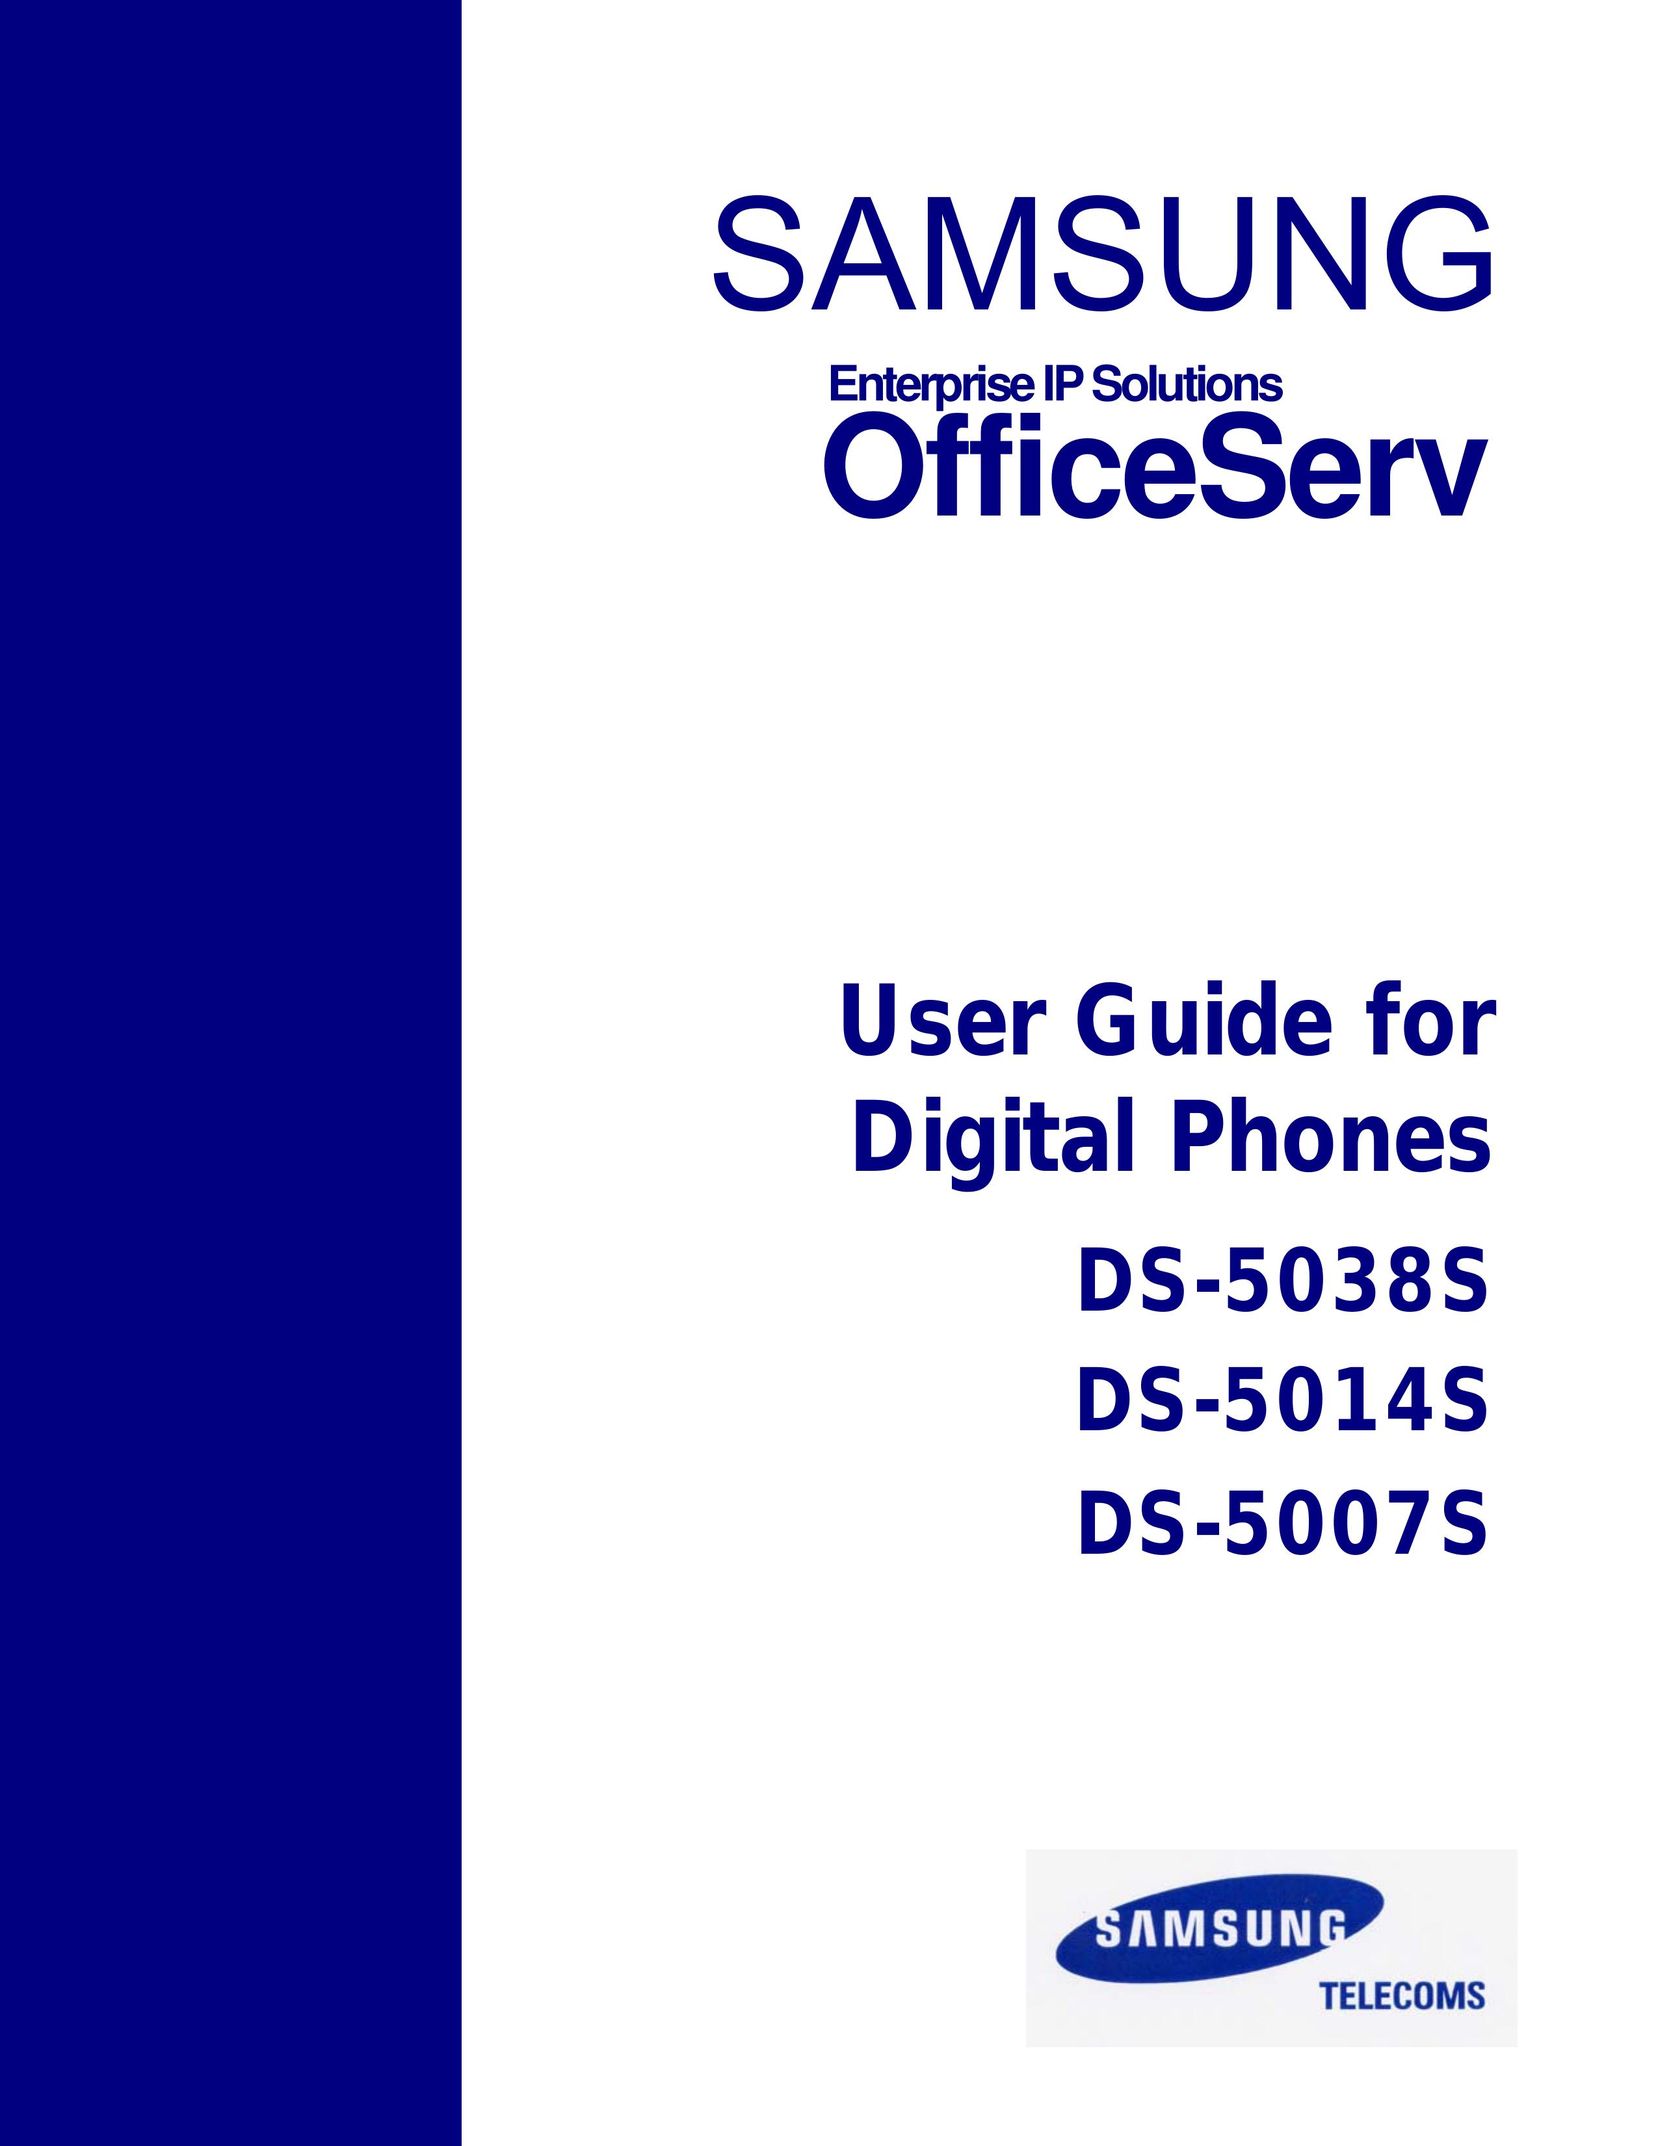 Samsung and DS-5007S Telephone User Manual